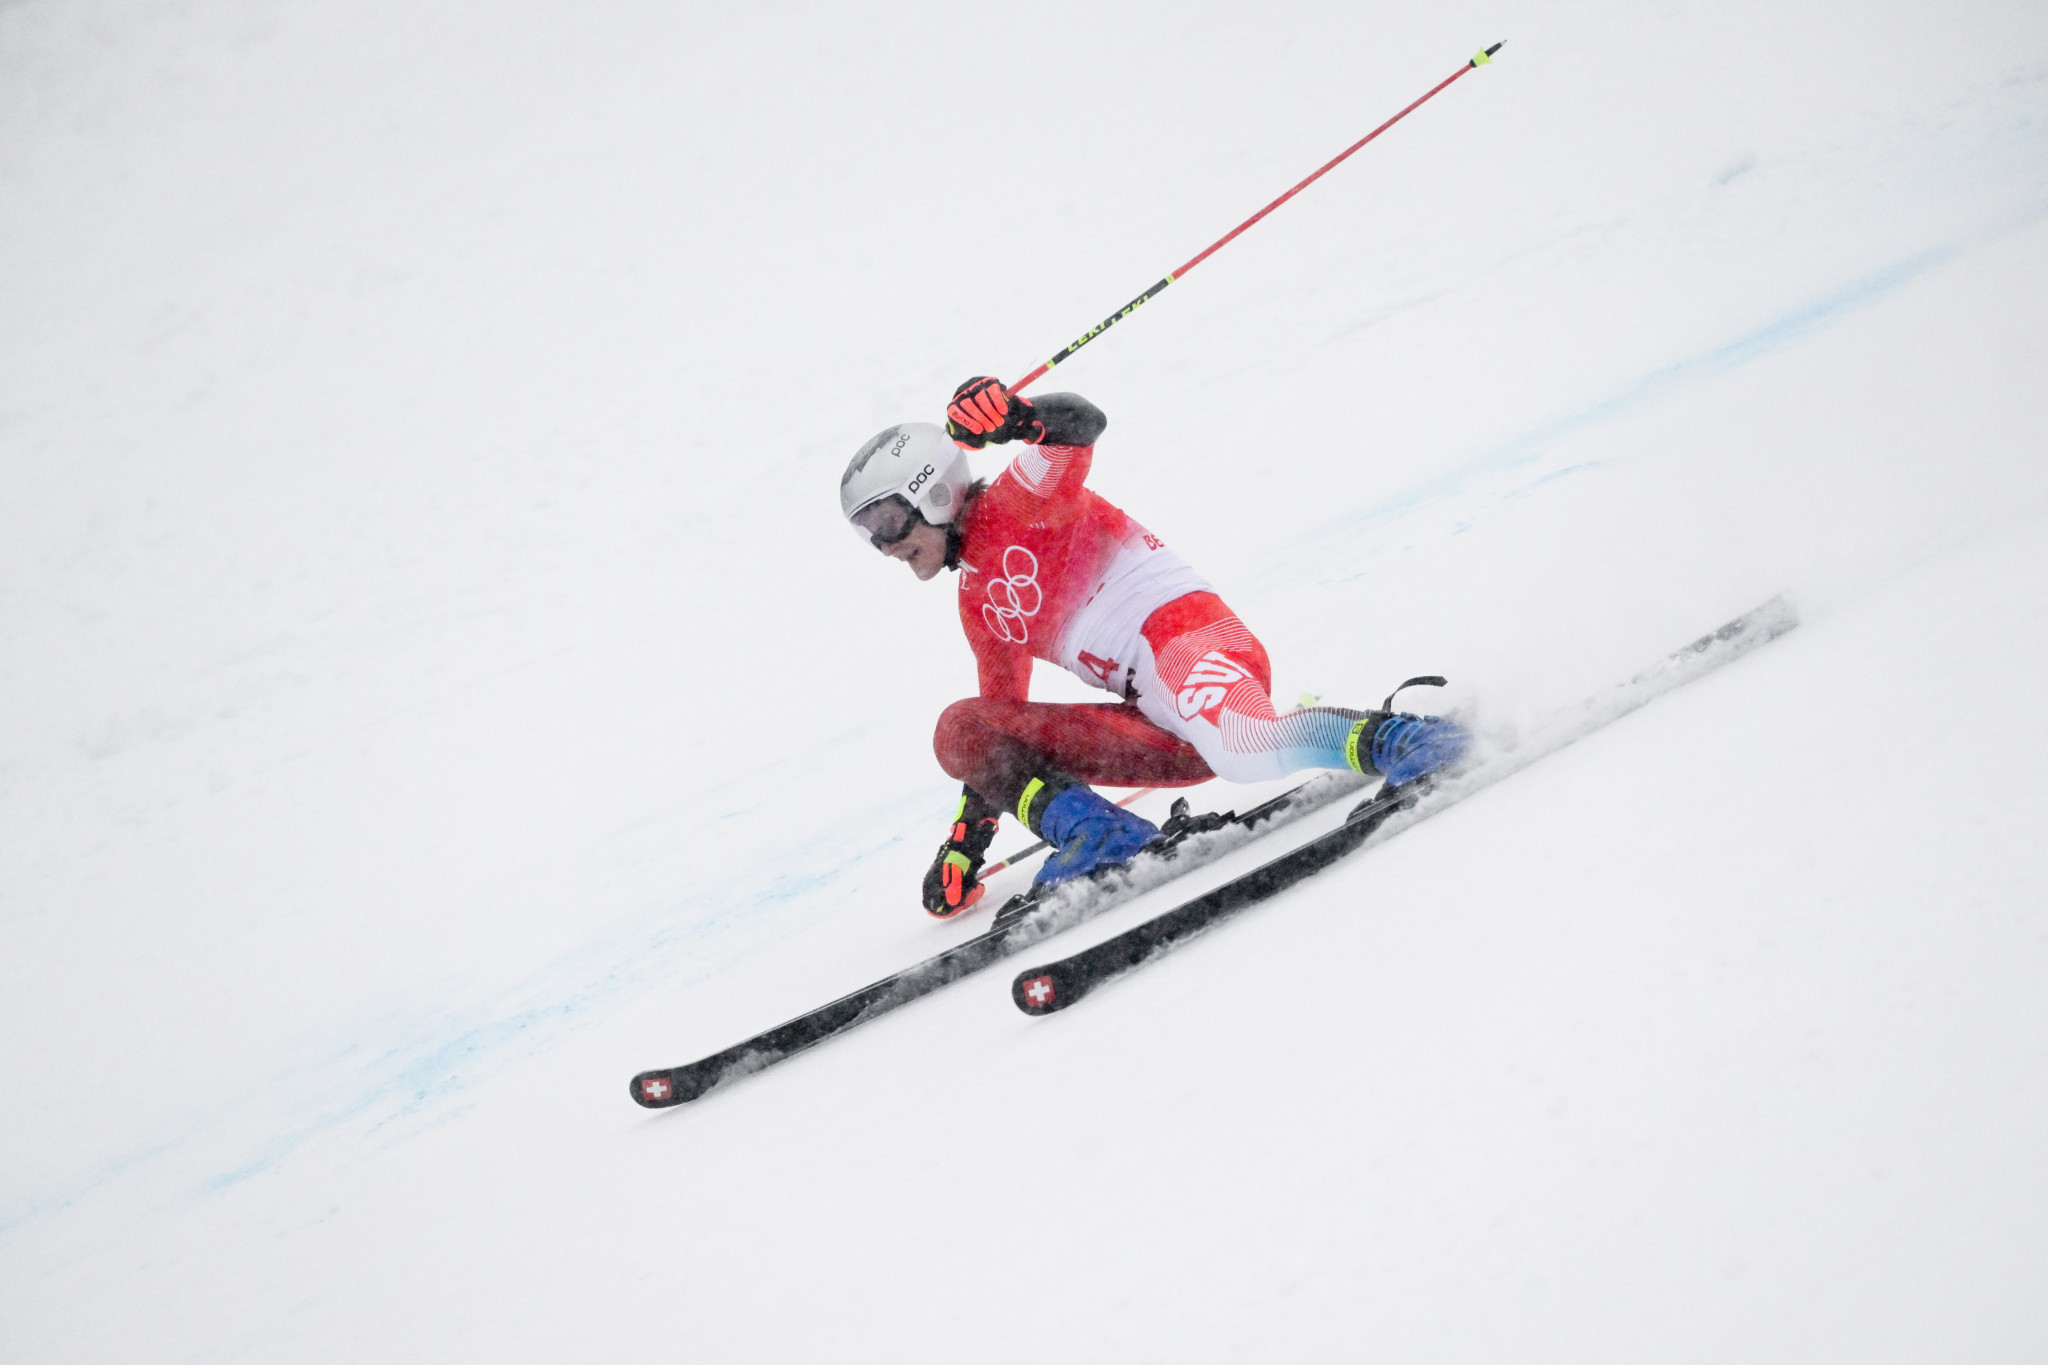 Switzerland's Marco Odermatt put together two strong runs to win the men's giant slalom despite heavy snowfall ©Getty Images